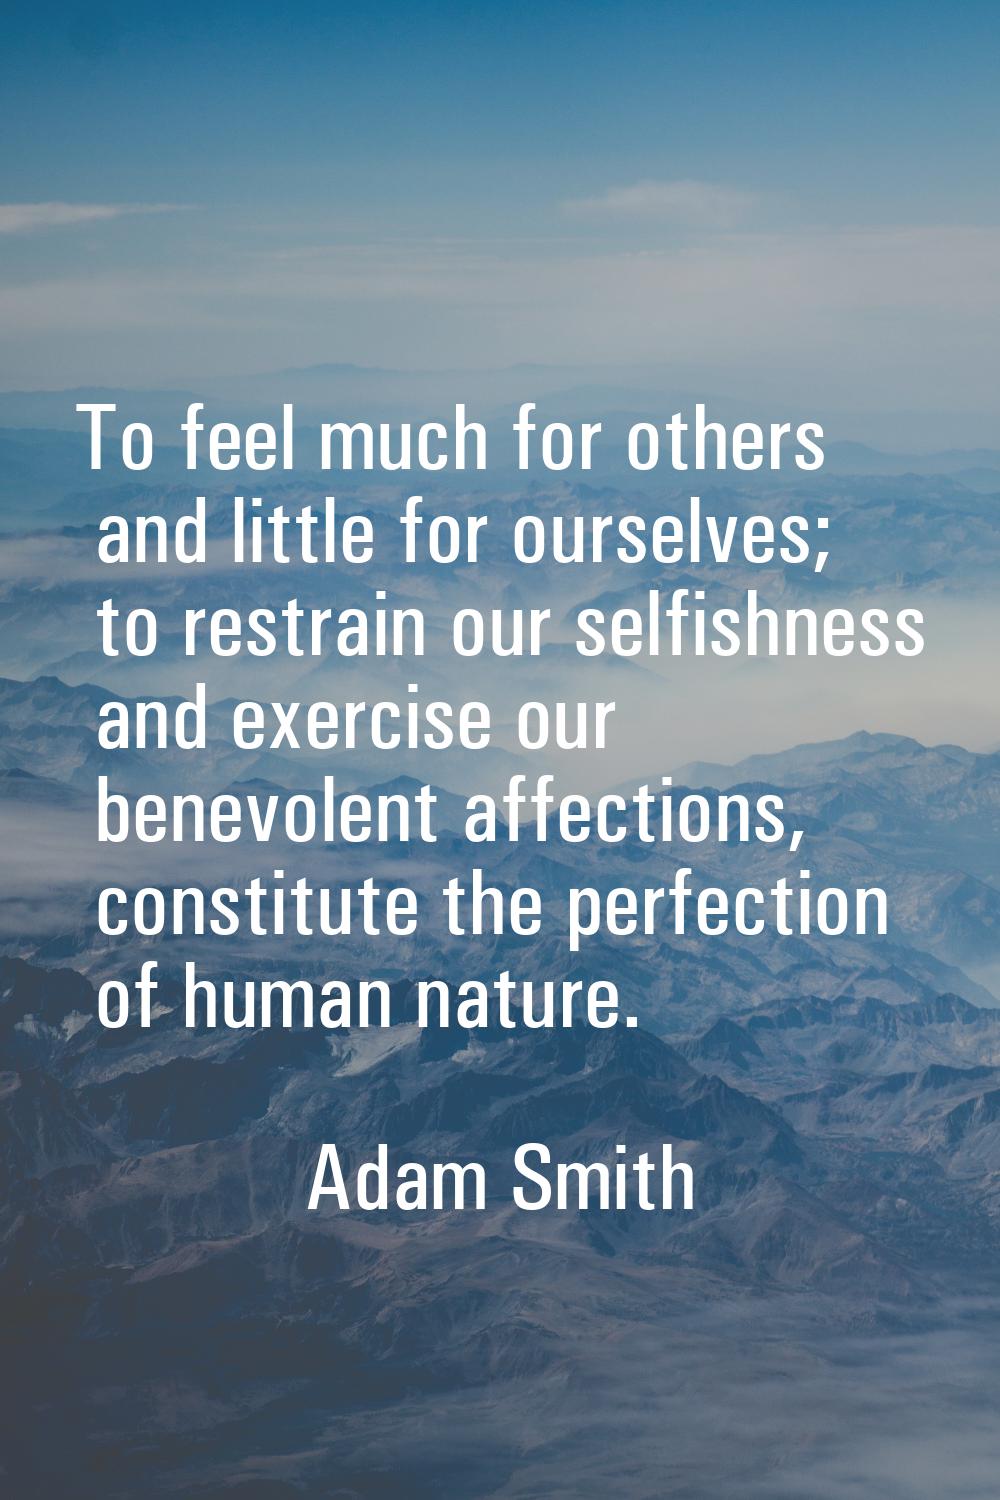 To feel much for others and little for ourselves; to restrain our selfishness and exercise our bene